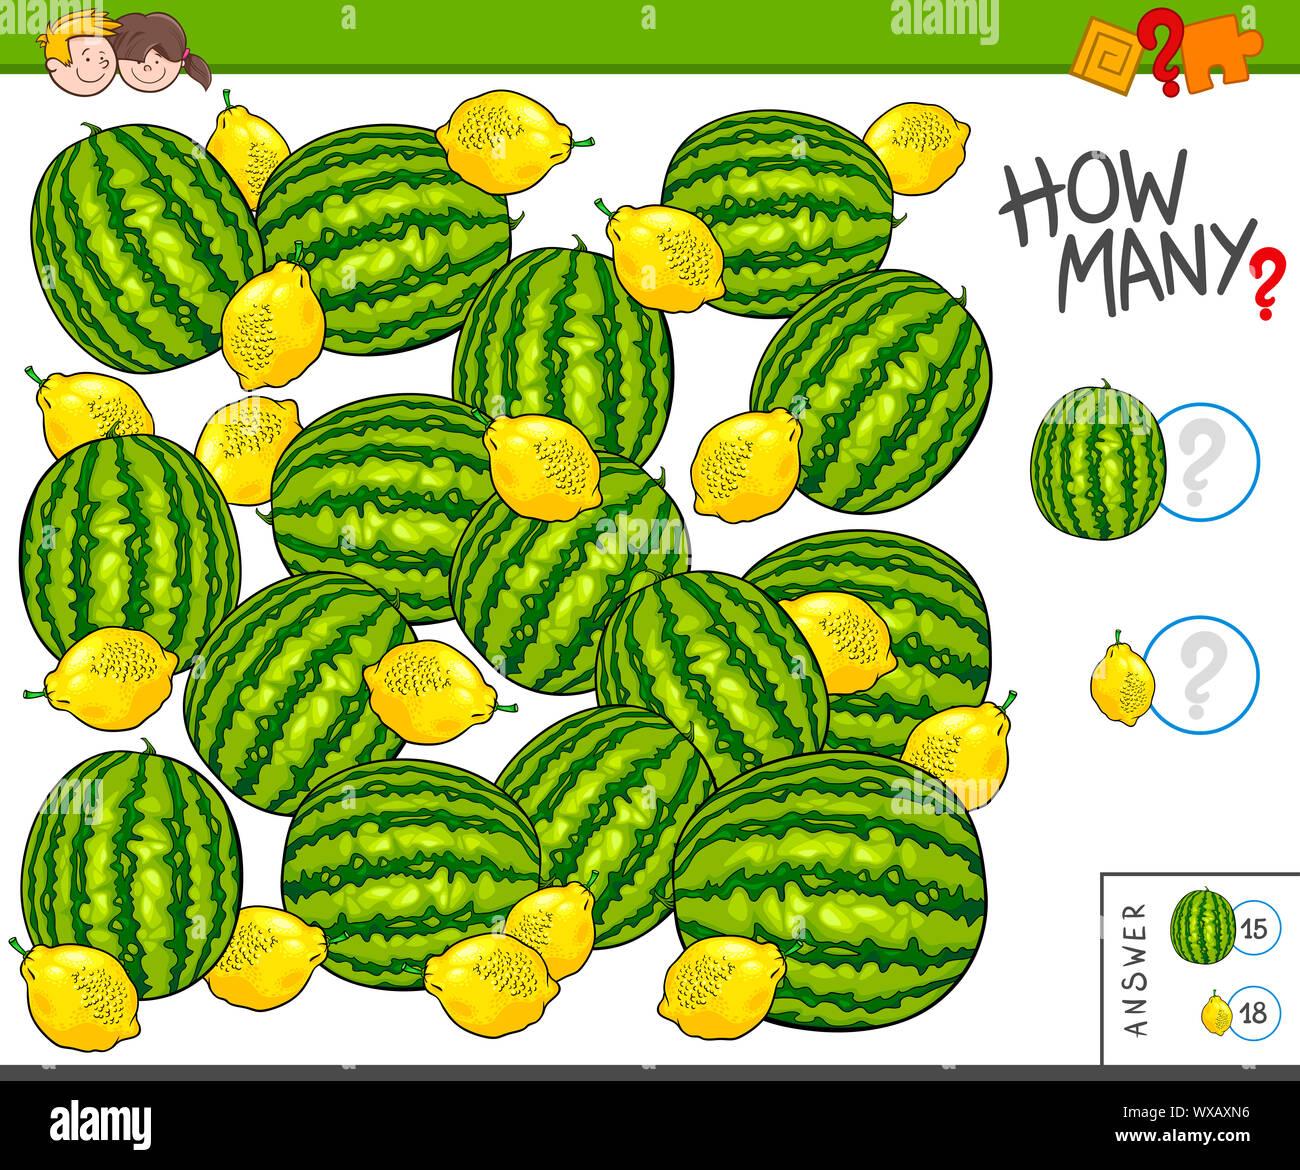 how many fruits educational counting game Stock Photo